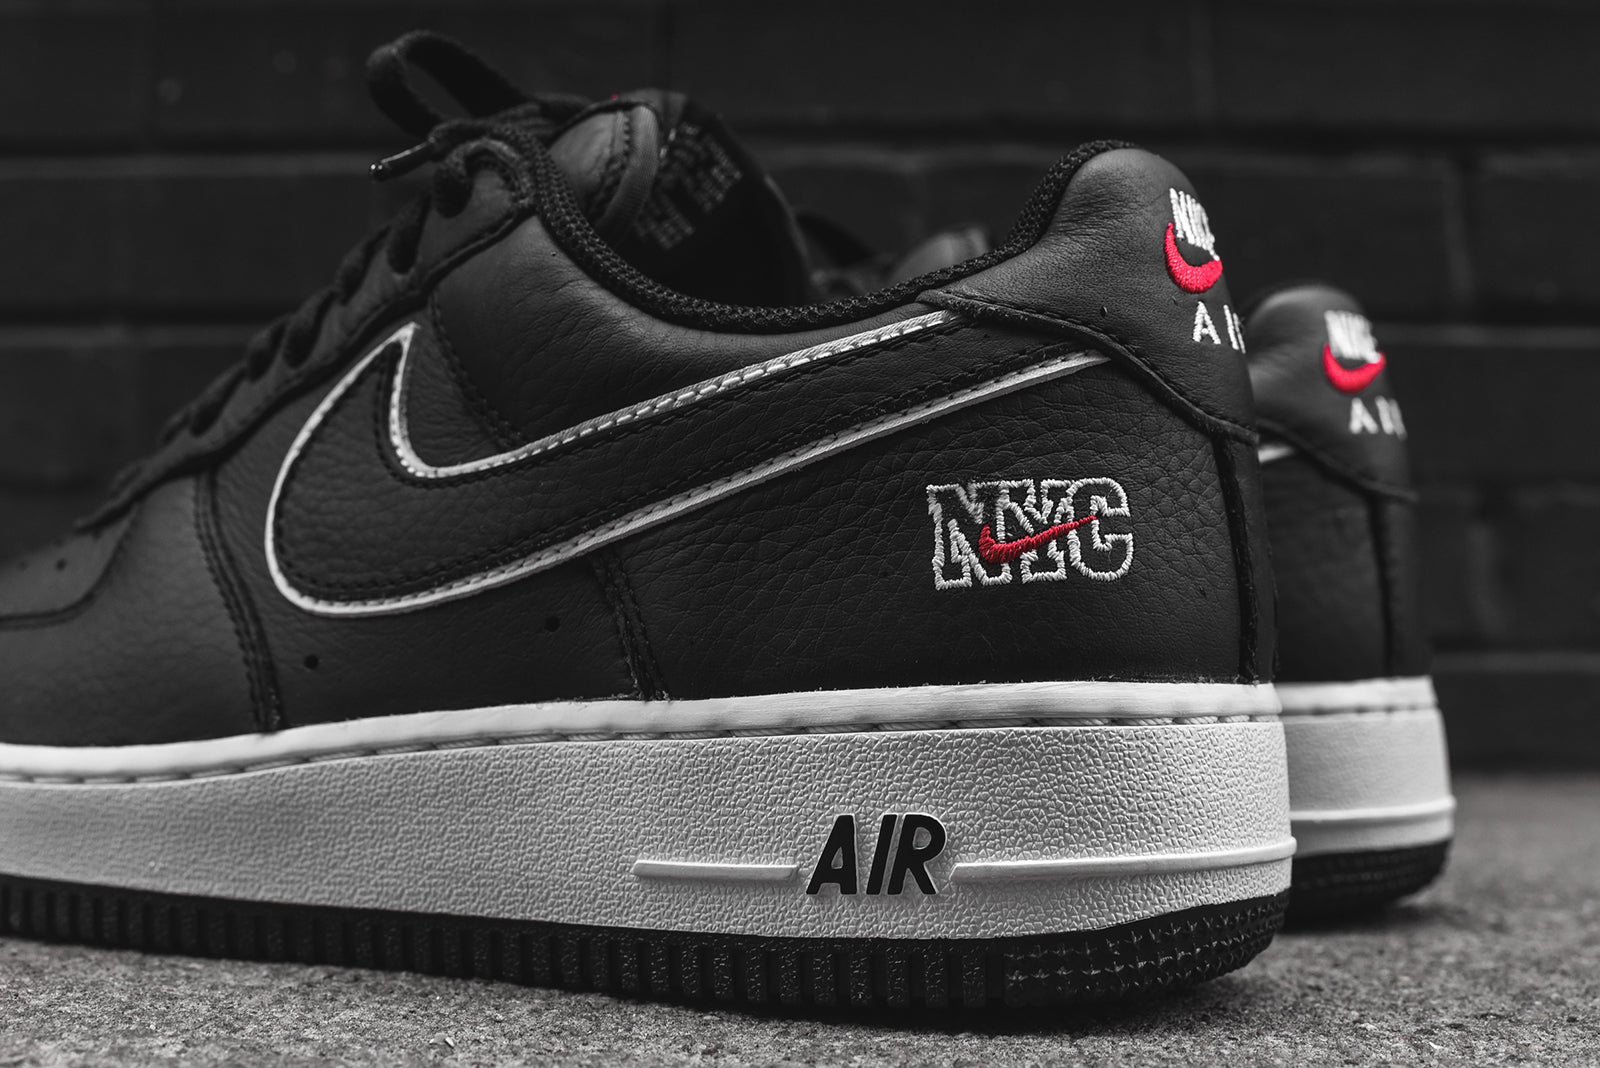 Air Force 1 Low Retro QS Black/White – West NYC